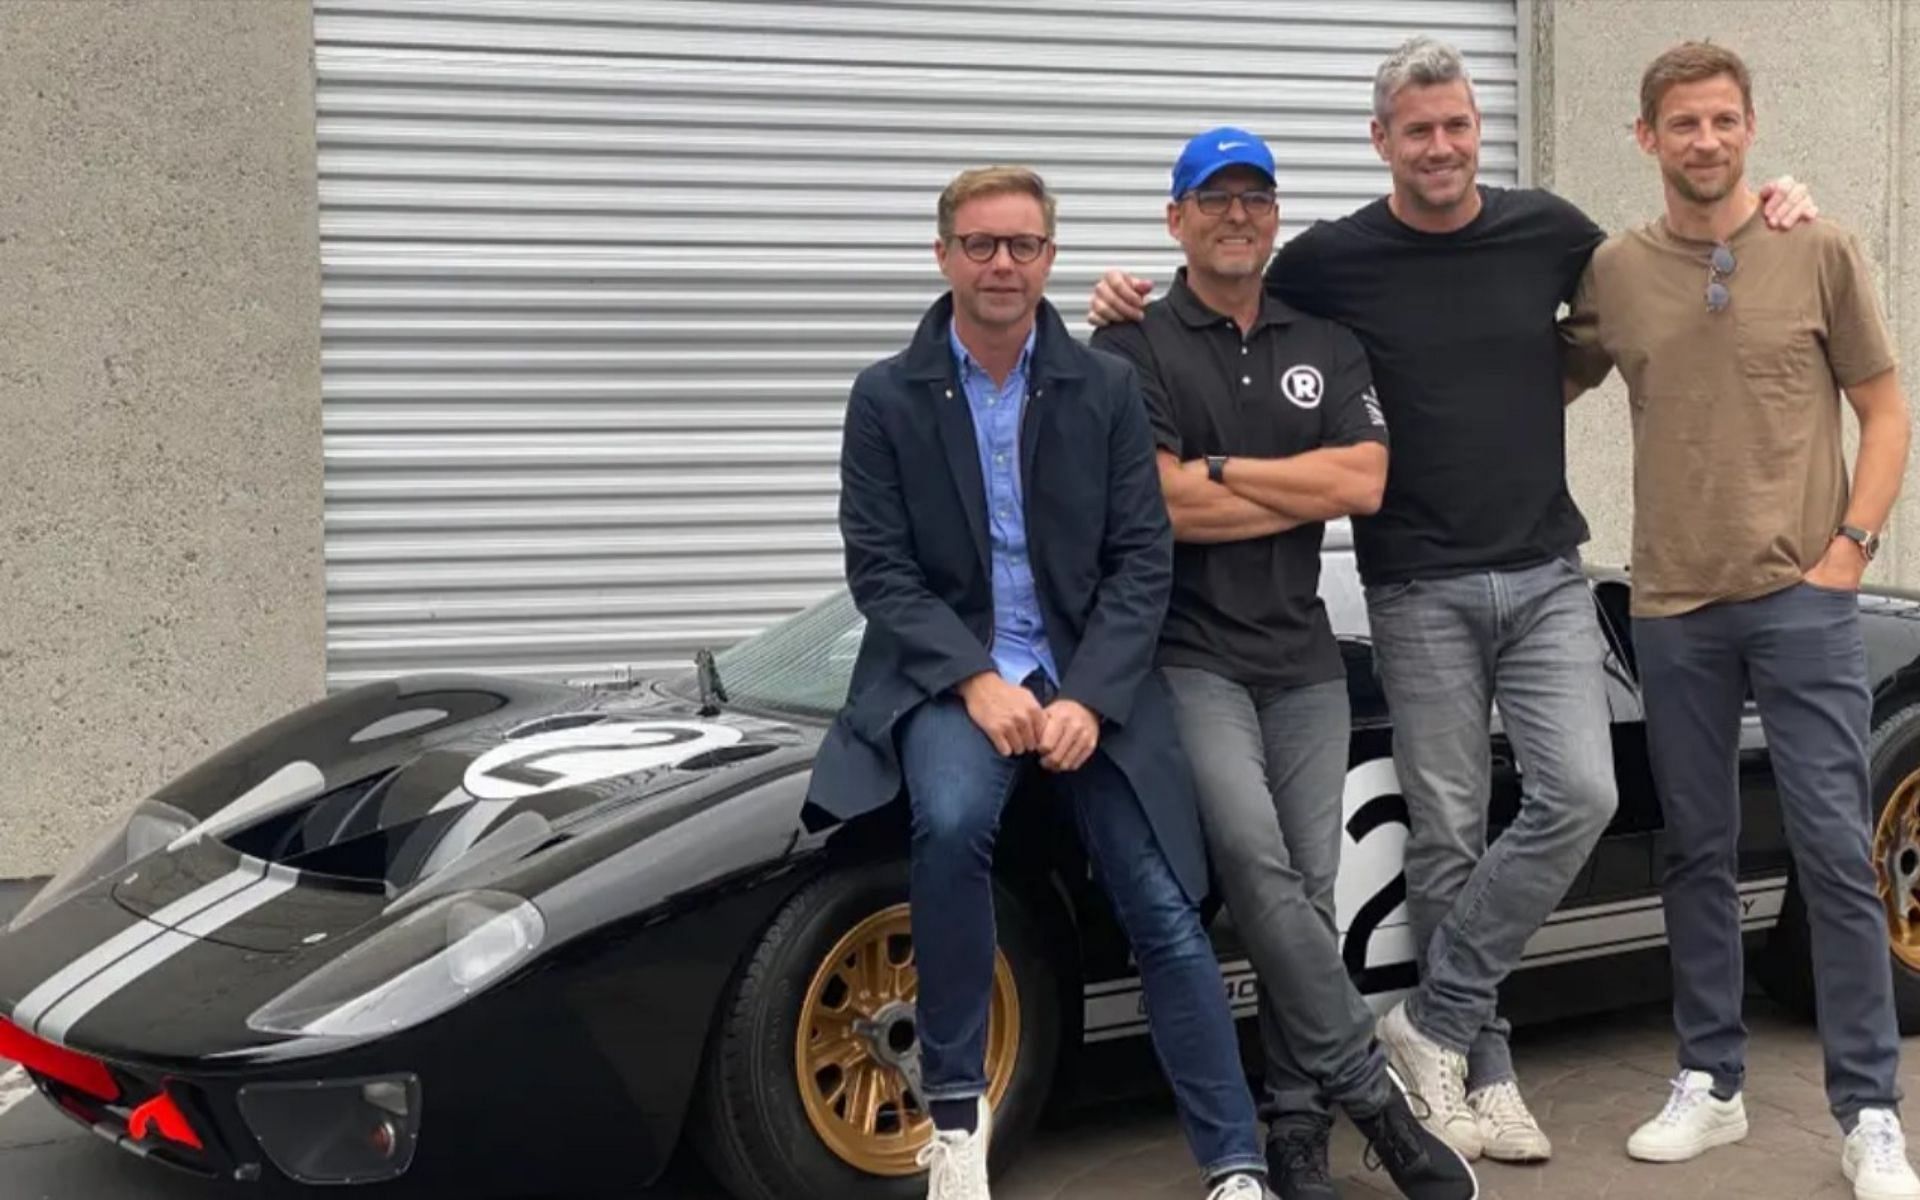 A look at the primary cast of Radford Returns (Image via Top Gear.com)